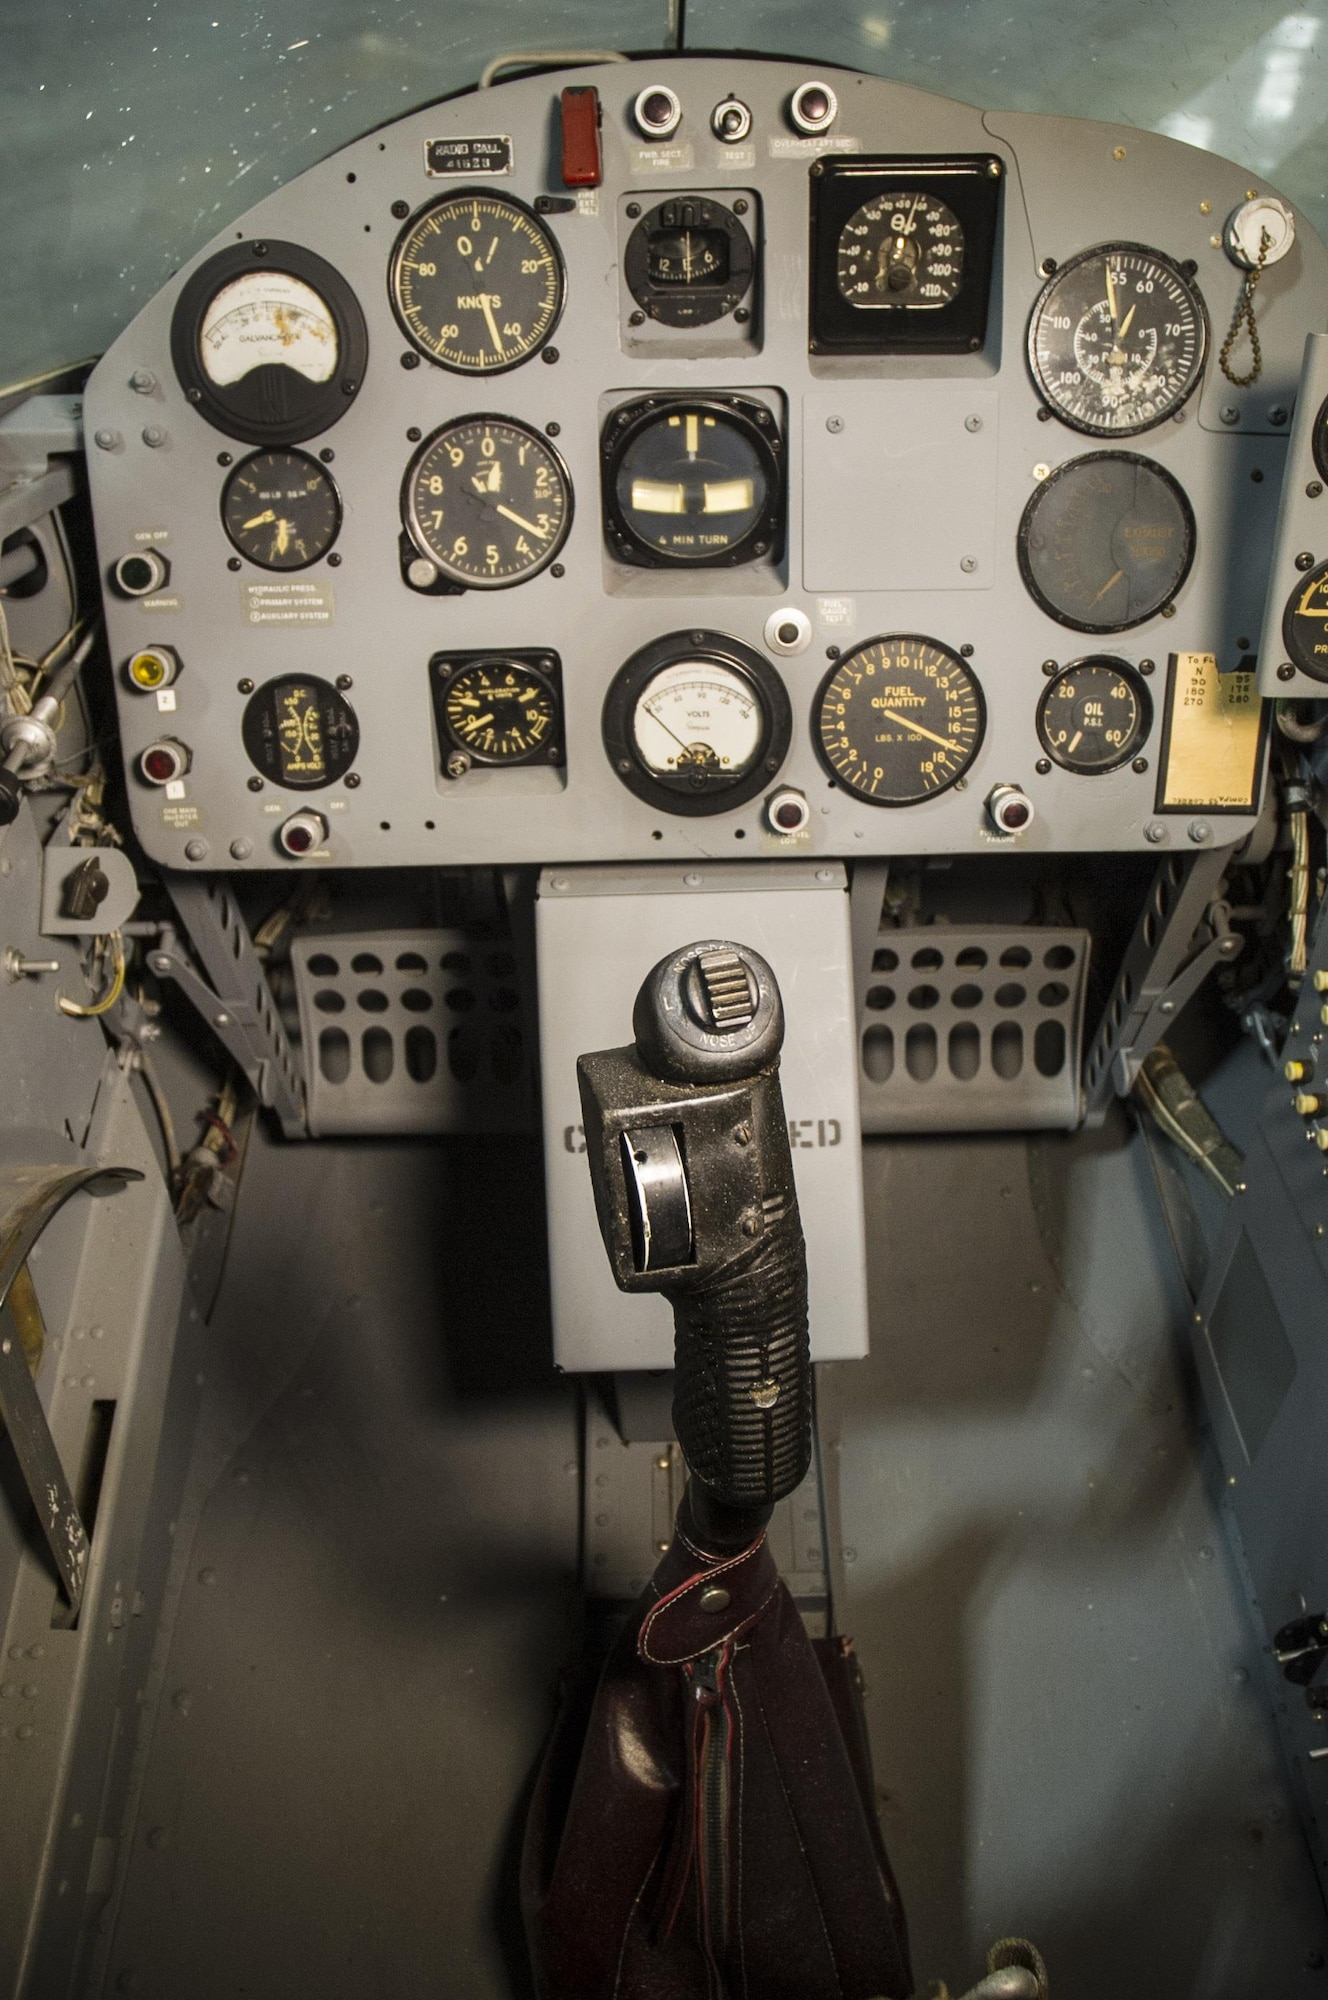 DAYTON, Ohio -- Ryan X-13 Vertijet cockpit in the Research & Development Gallery at the National Museum of the U.S. Air Force. (U.S. Air Force photo by Ken LaRock)